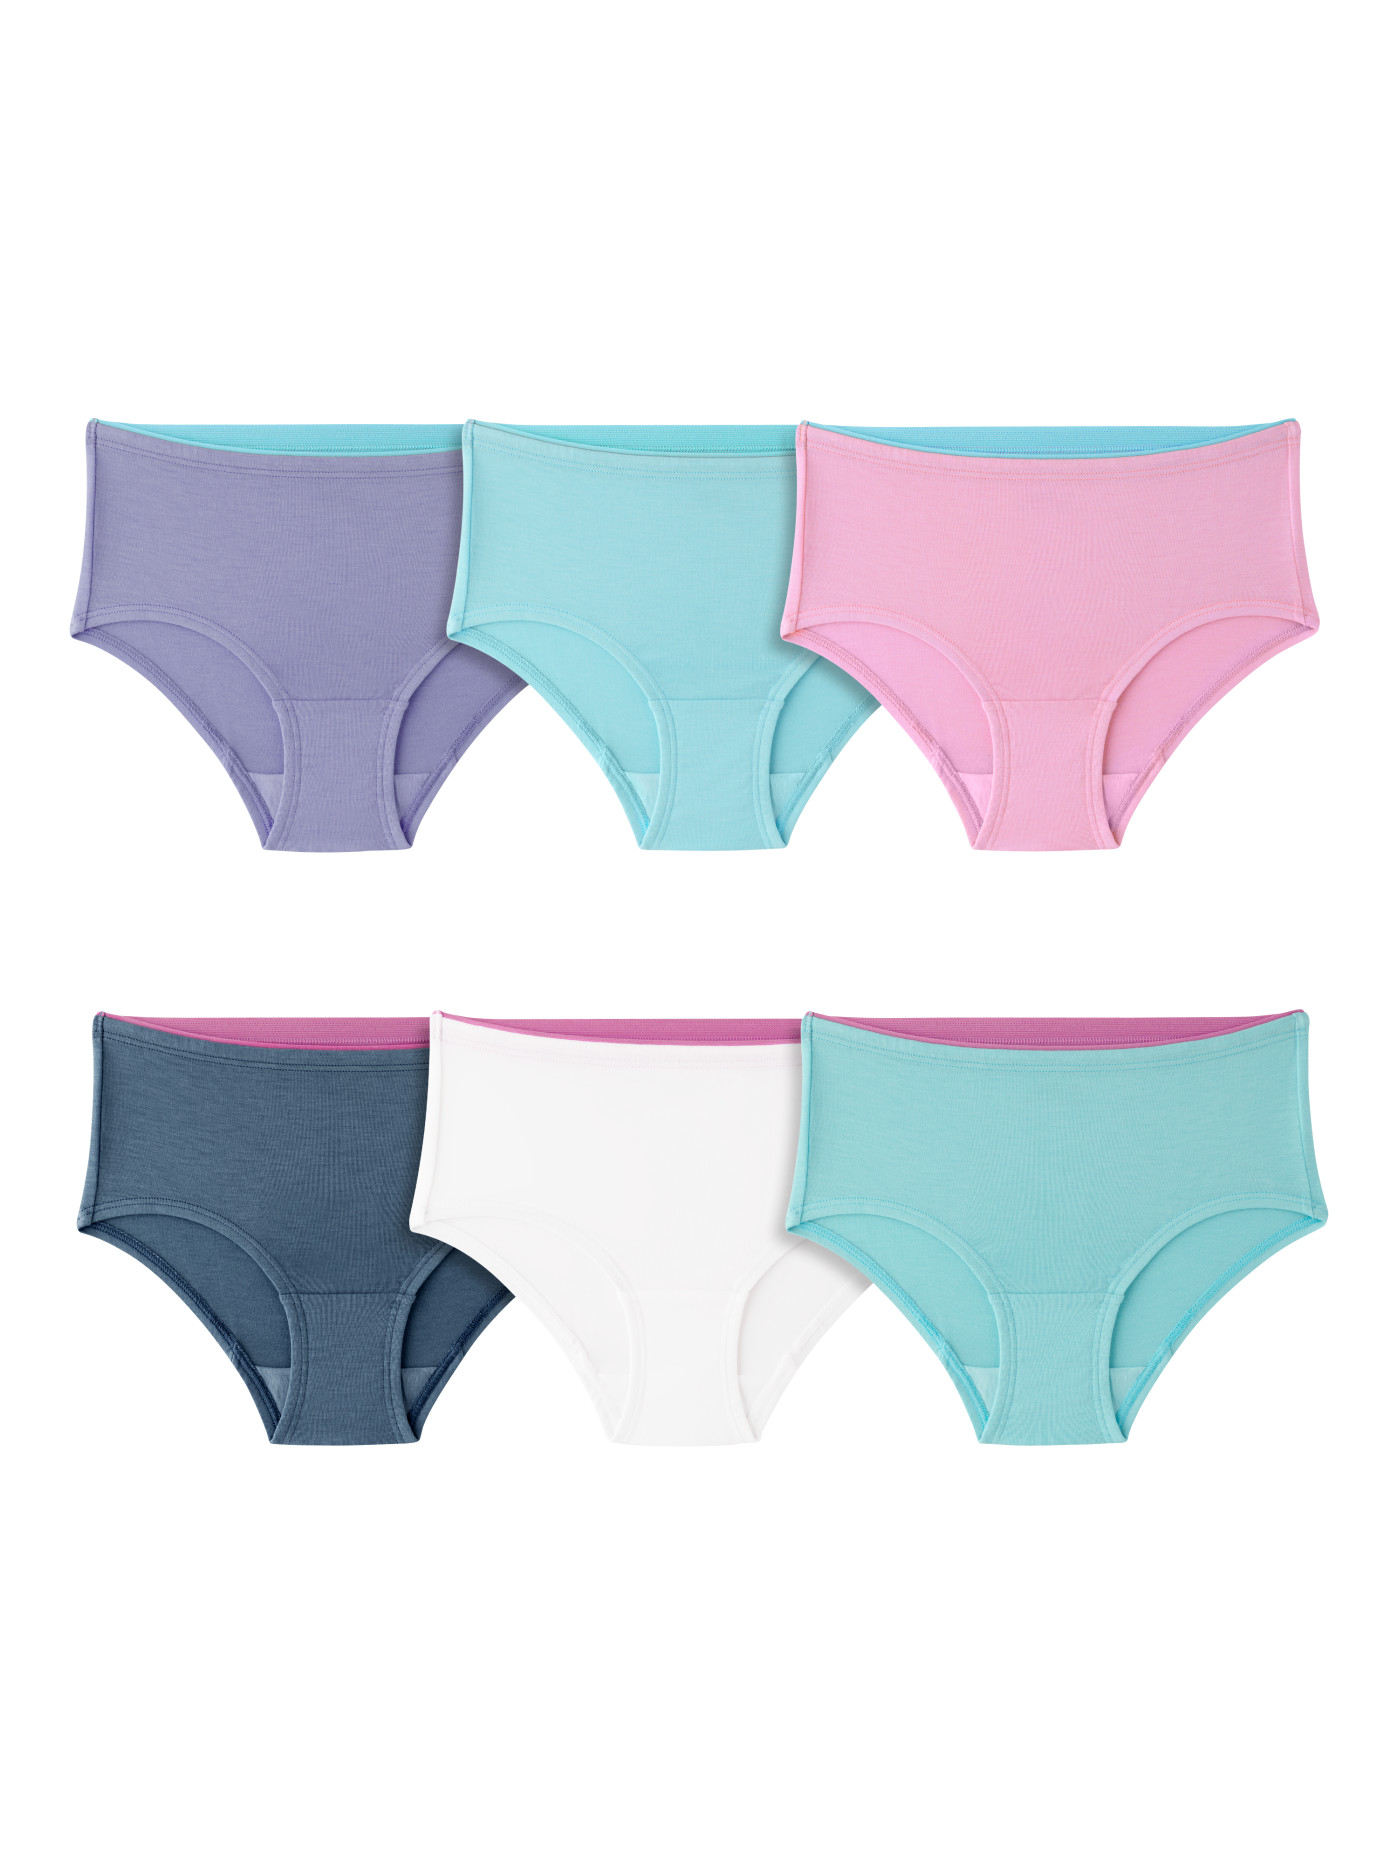 Fruit of the loom 6 Pack Youth panties size 10/12